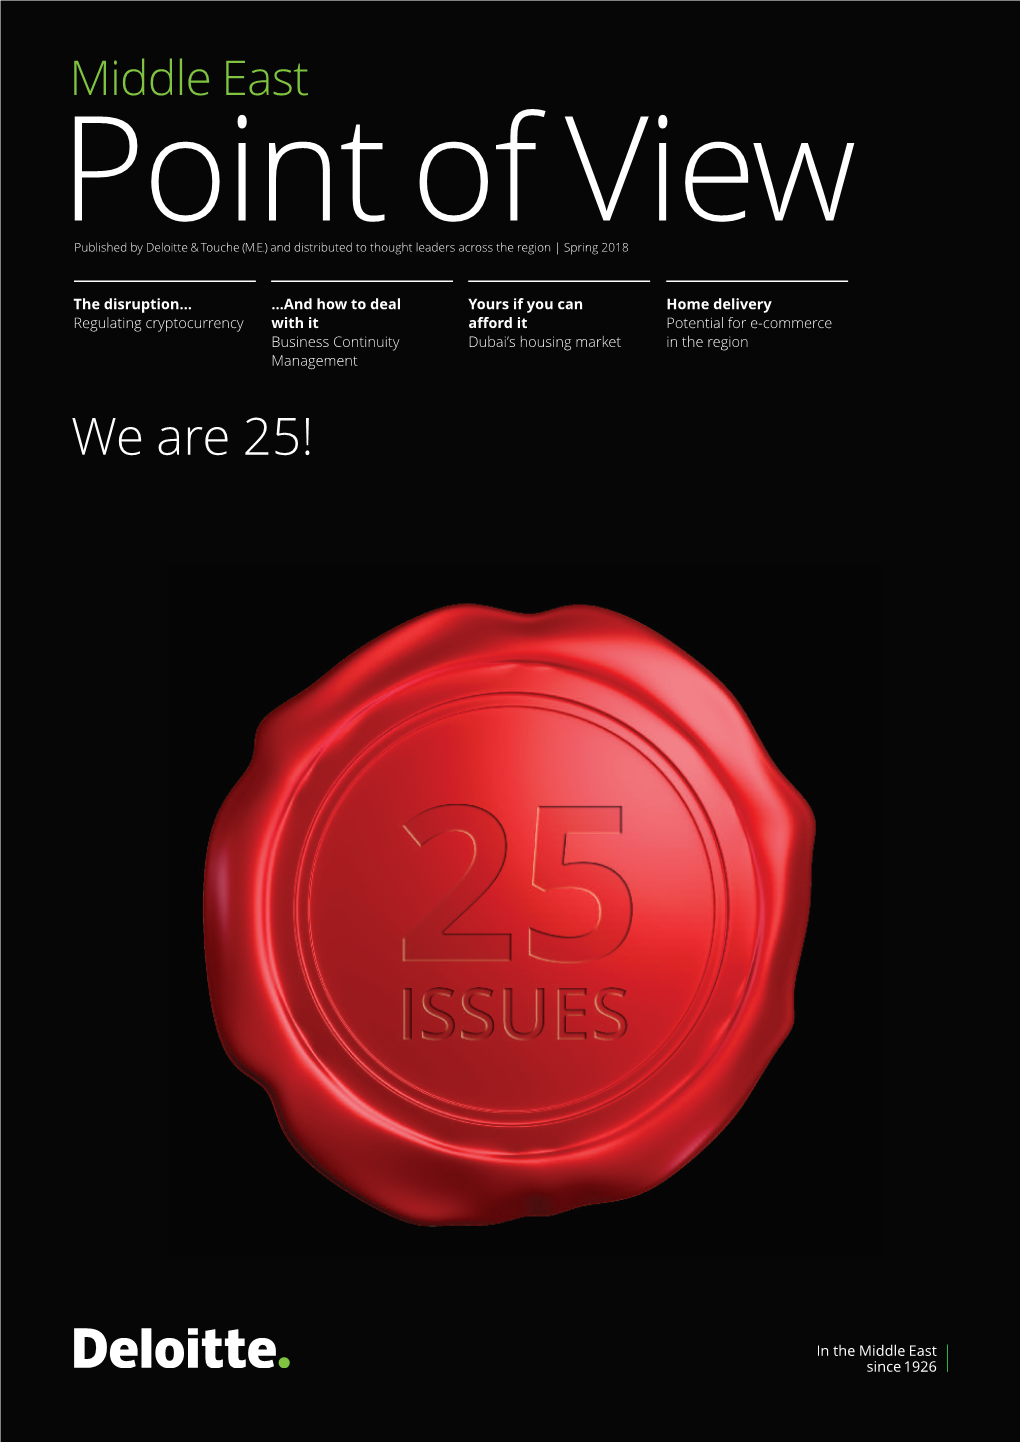 We Are 25! Deloitte | a Middle East Point of View - Spring 2018 |